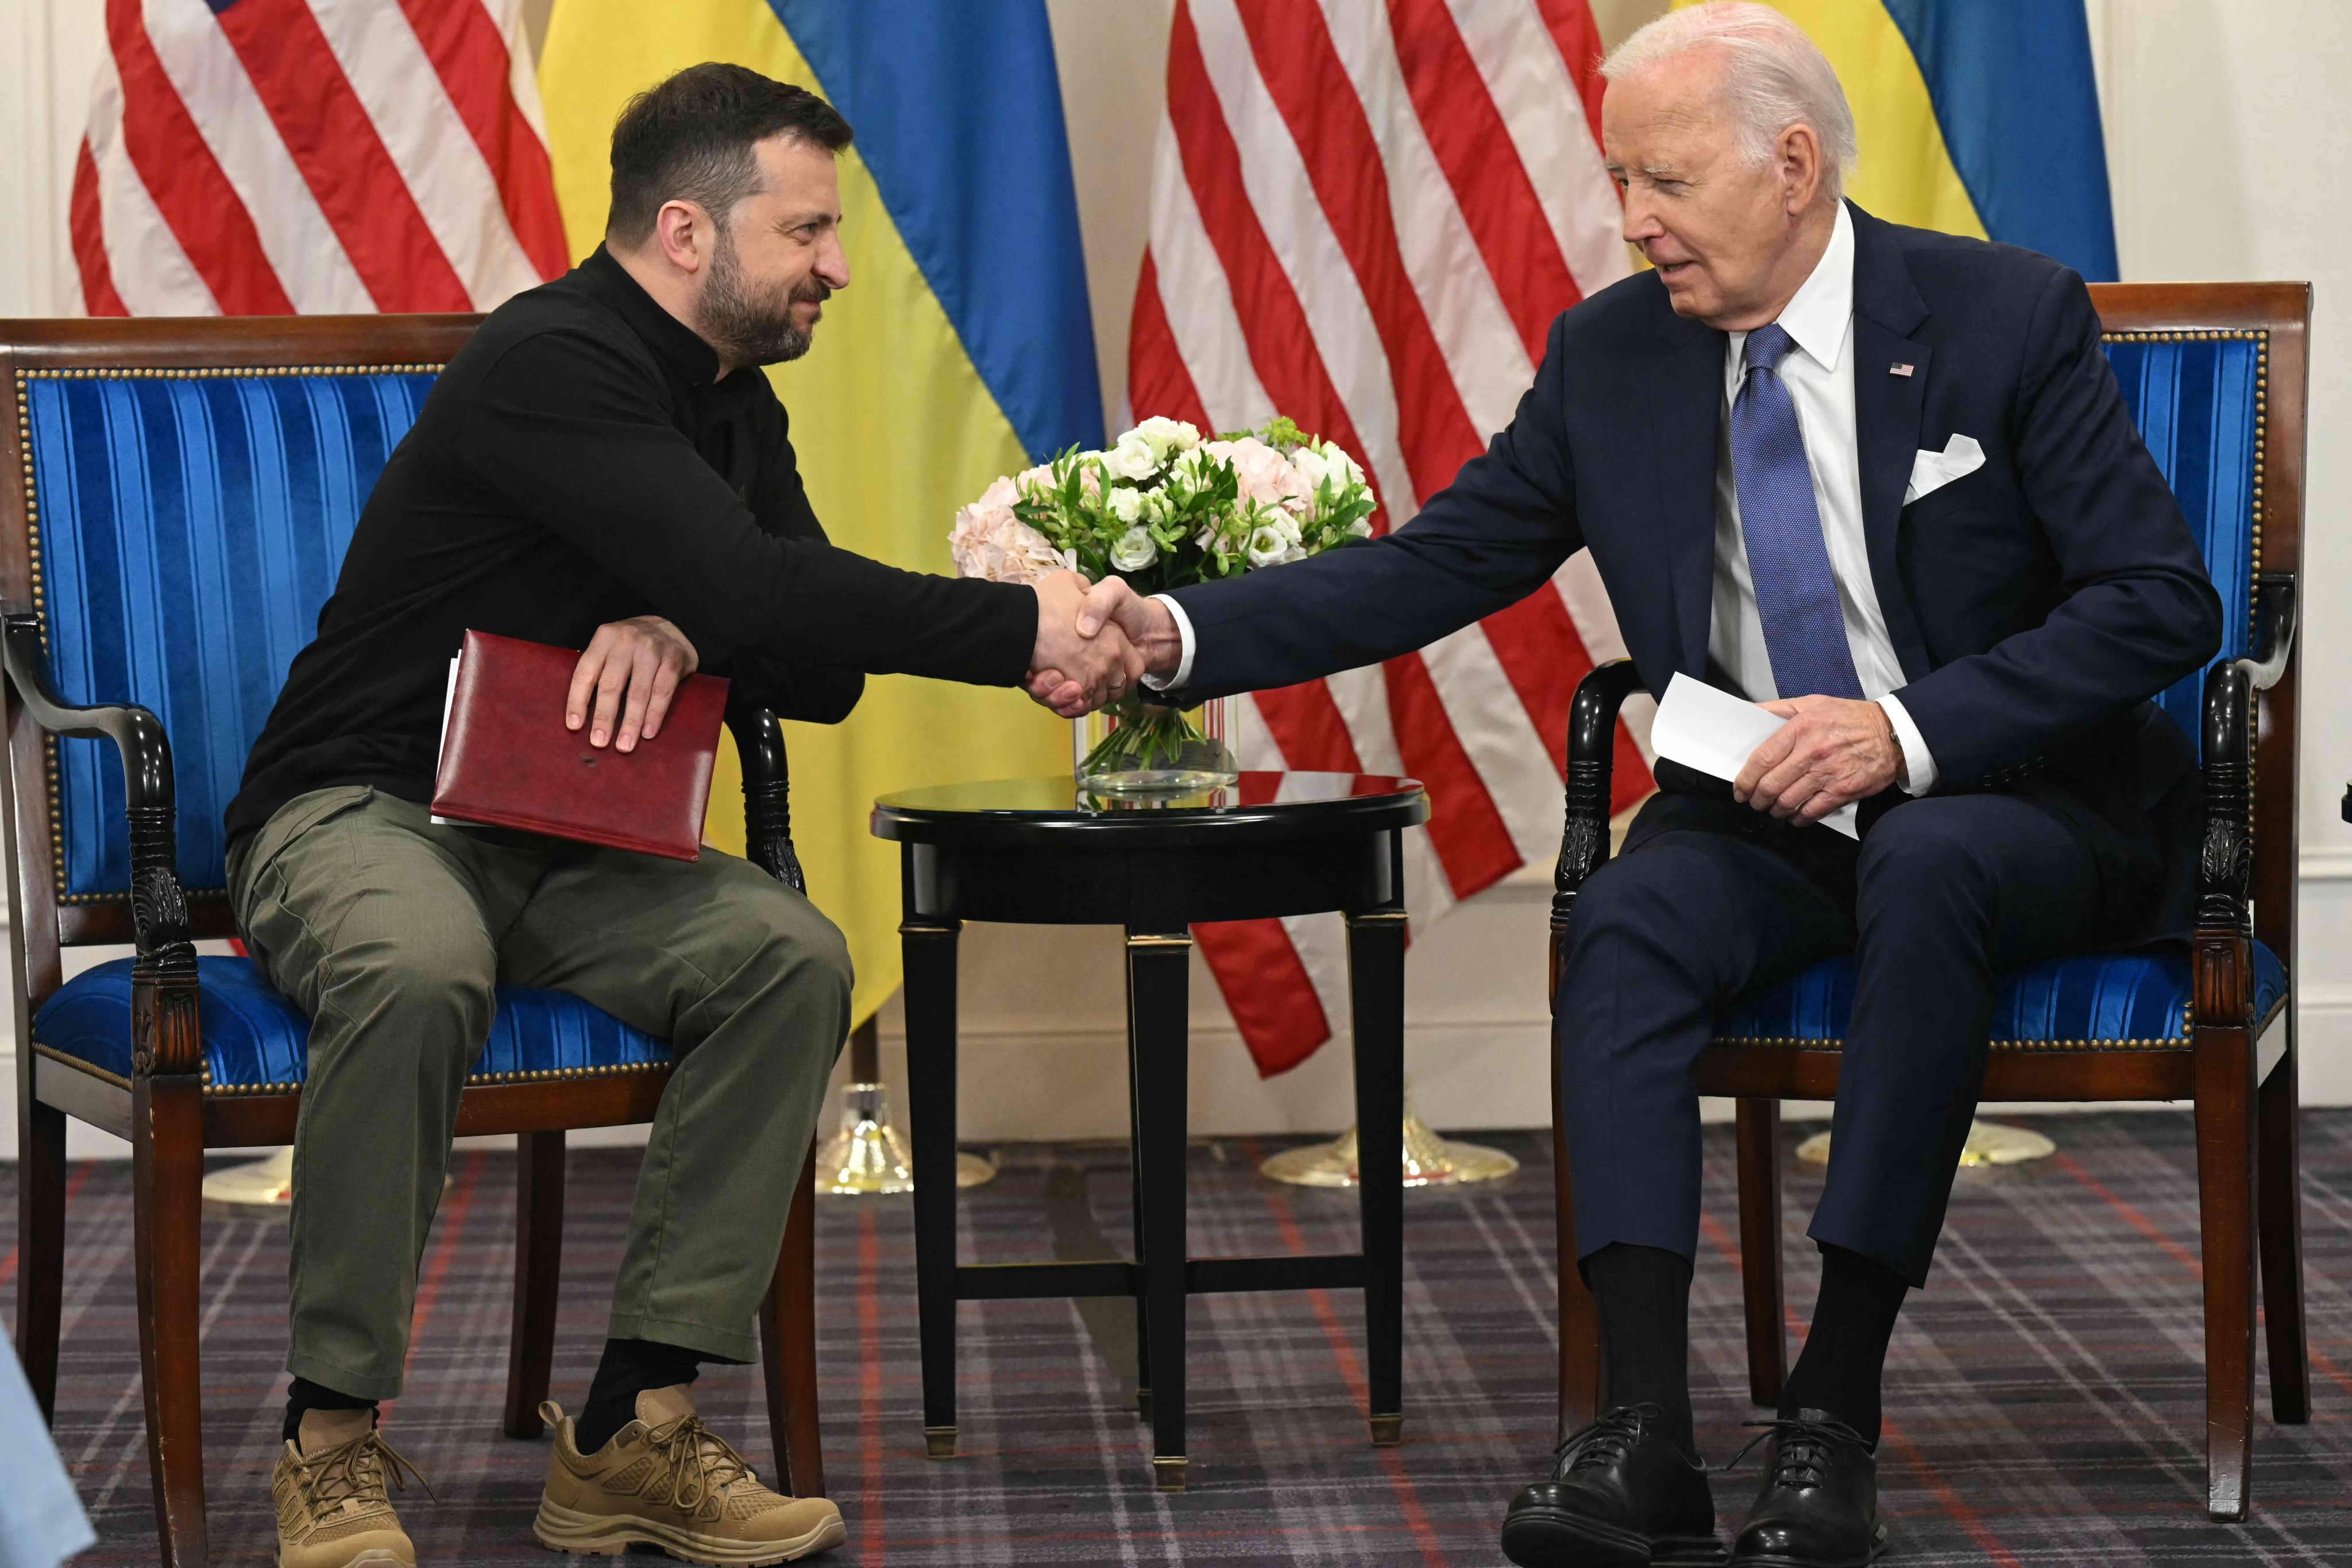 US President Joe Biden (right) shakes hands with Ukraine’s President Volodymyr Zelensky as they hold a bilateral meeting in Paris. Biden pledged his support for Ukraine and announced another US$225 million in aid to Kyiv. Photo: AFP